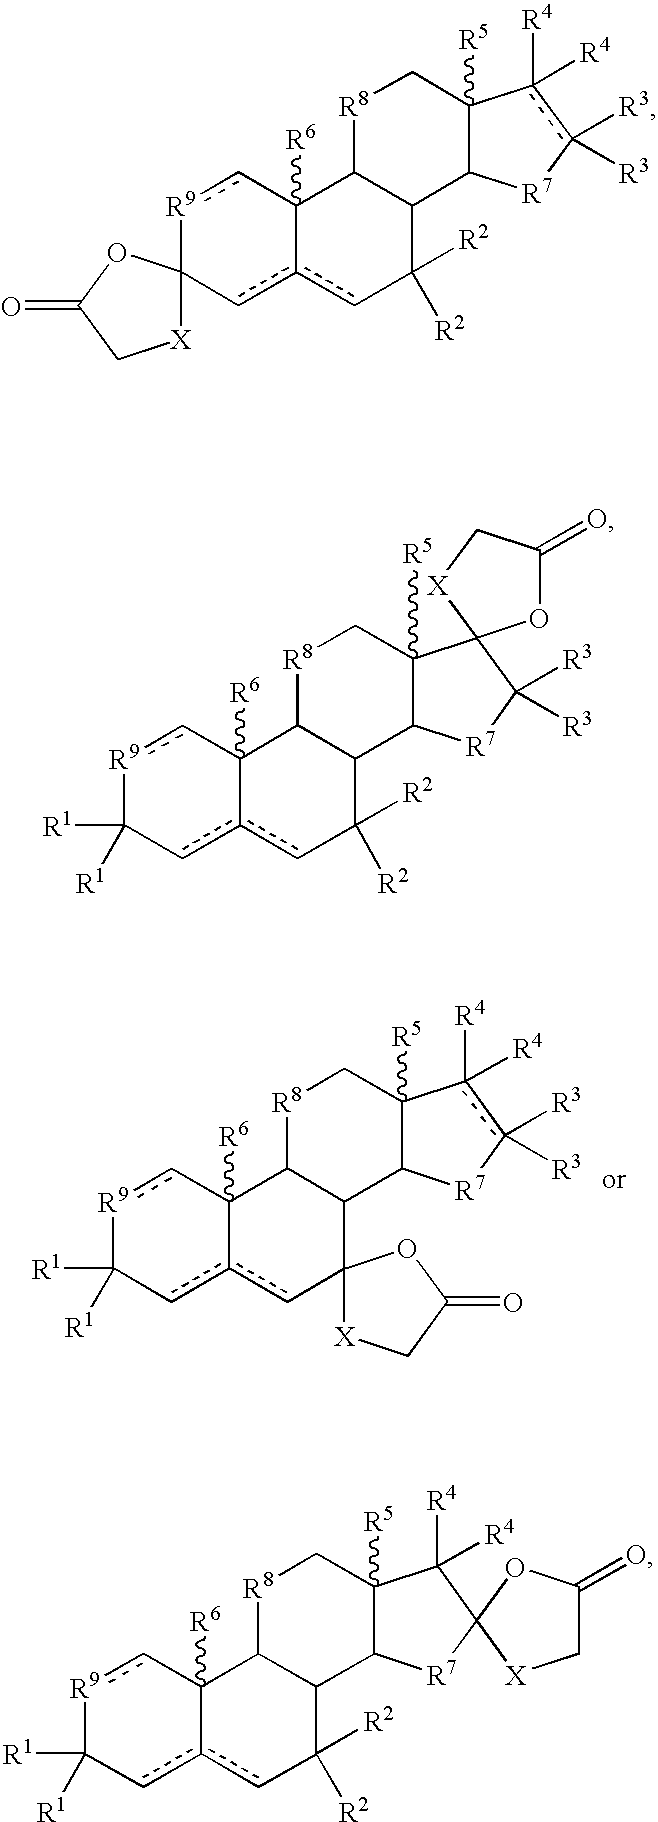 Formulations and Treatment Methods